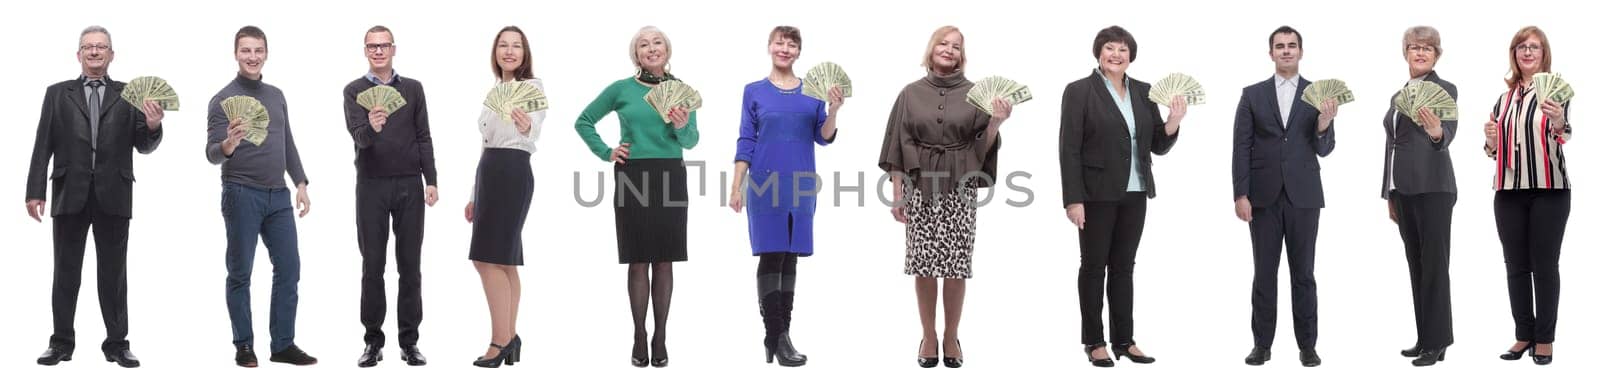 group of successful people holding money in hand by asdf